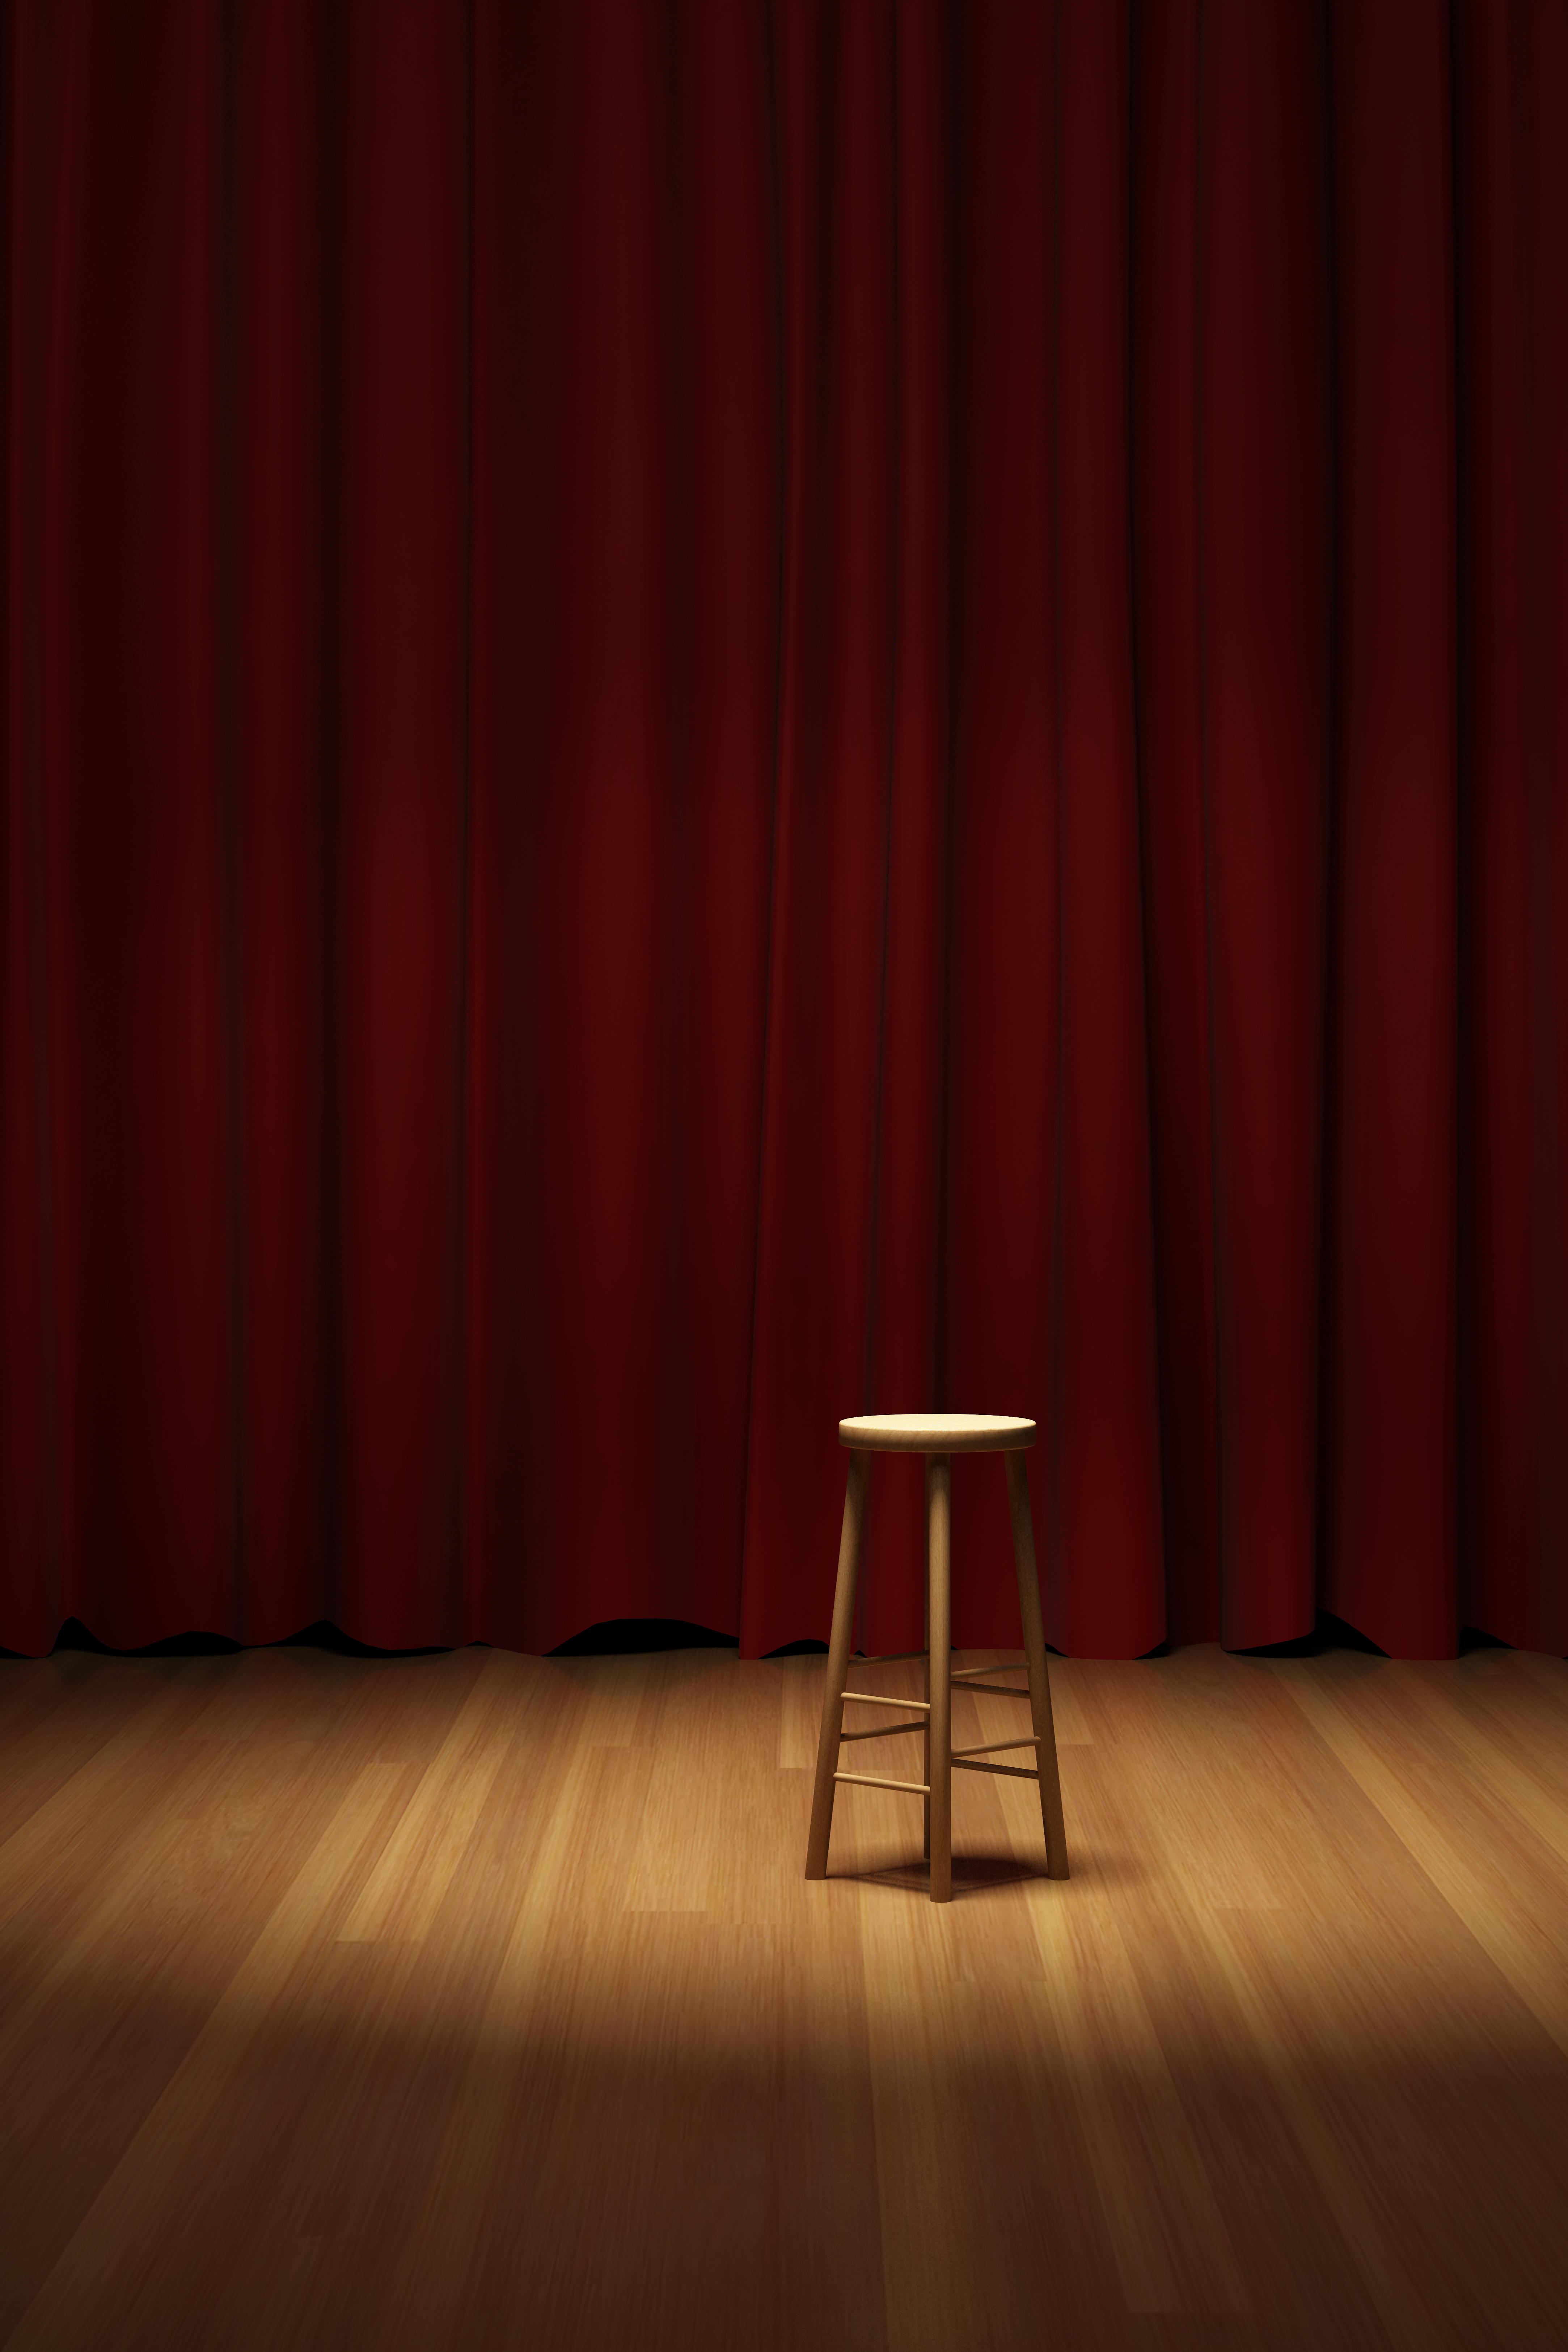 Stand up Comedy Stage Wallpaper images